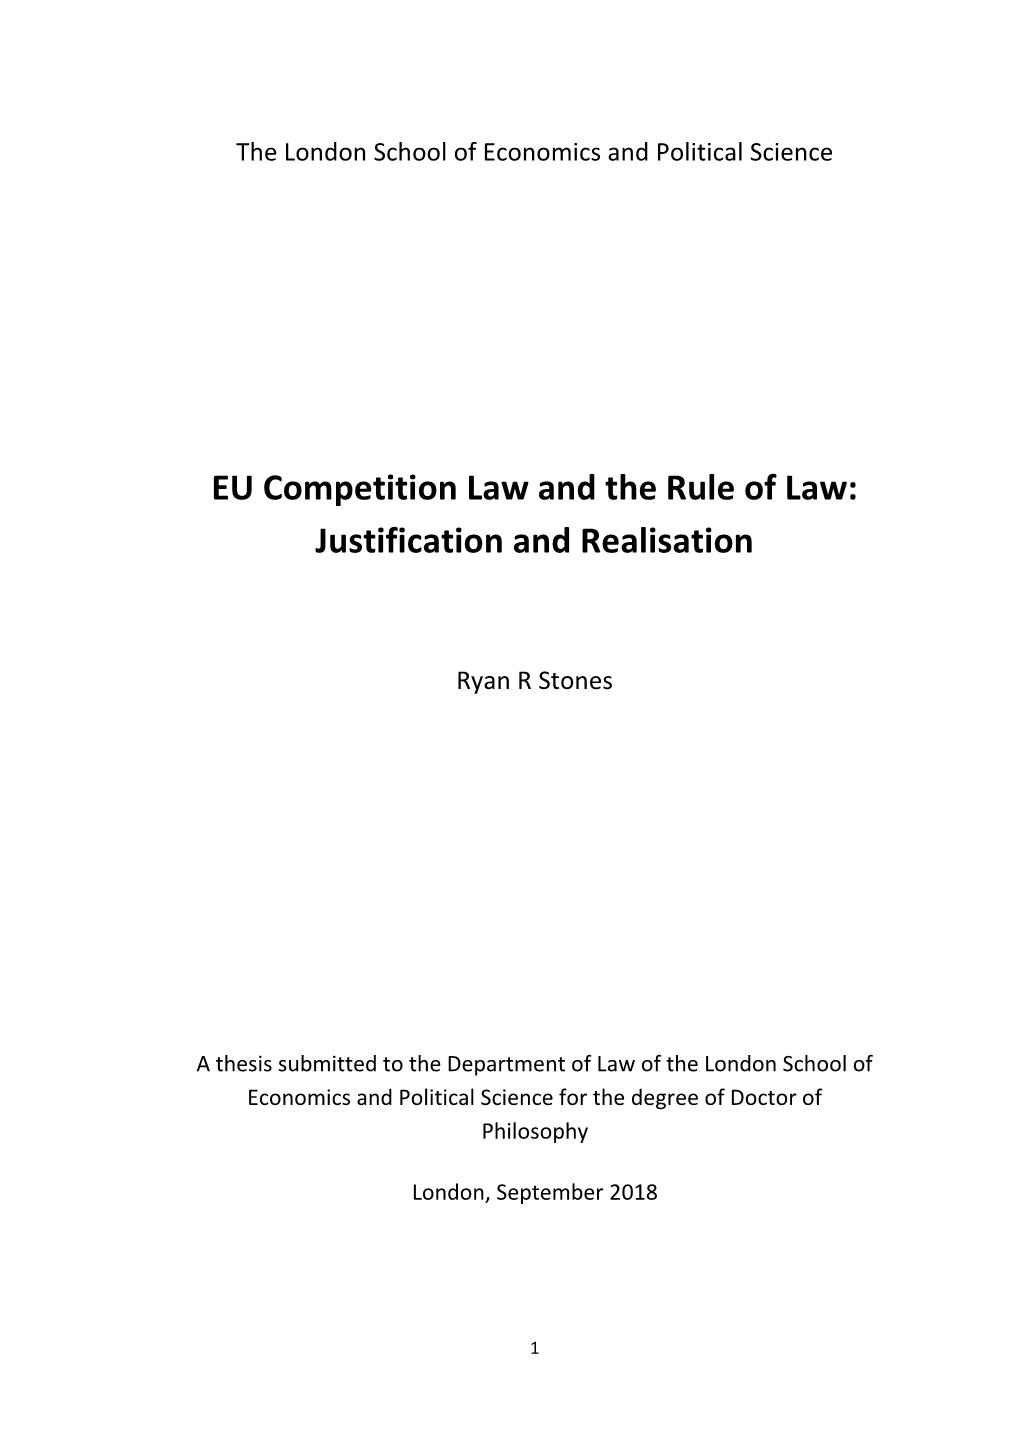 EU Competition Law and the Rule of Law: Justification and Realisation